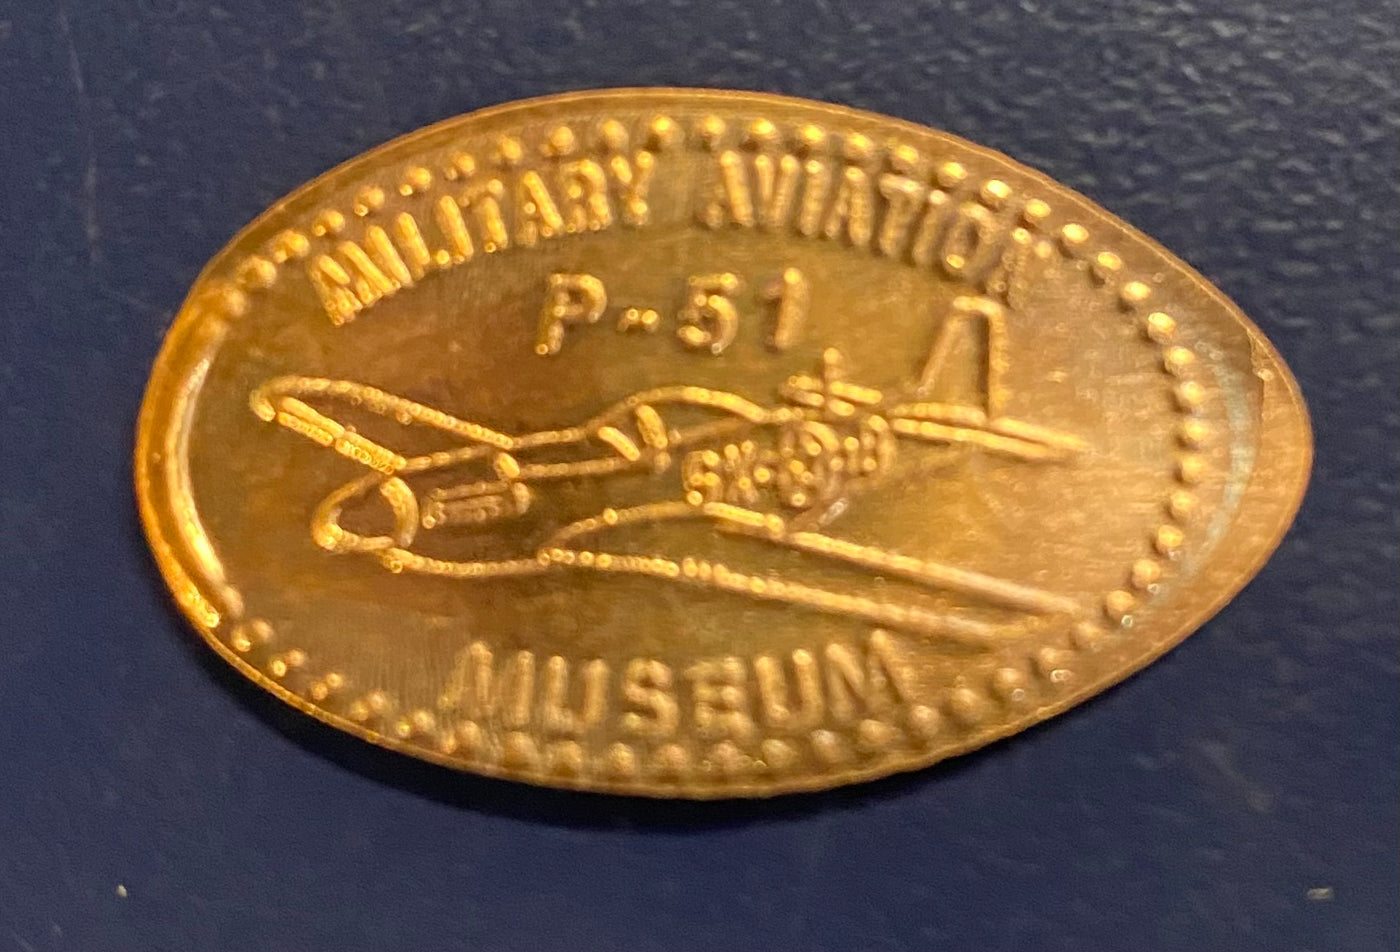 Military Aviation Museum Pressed Penny